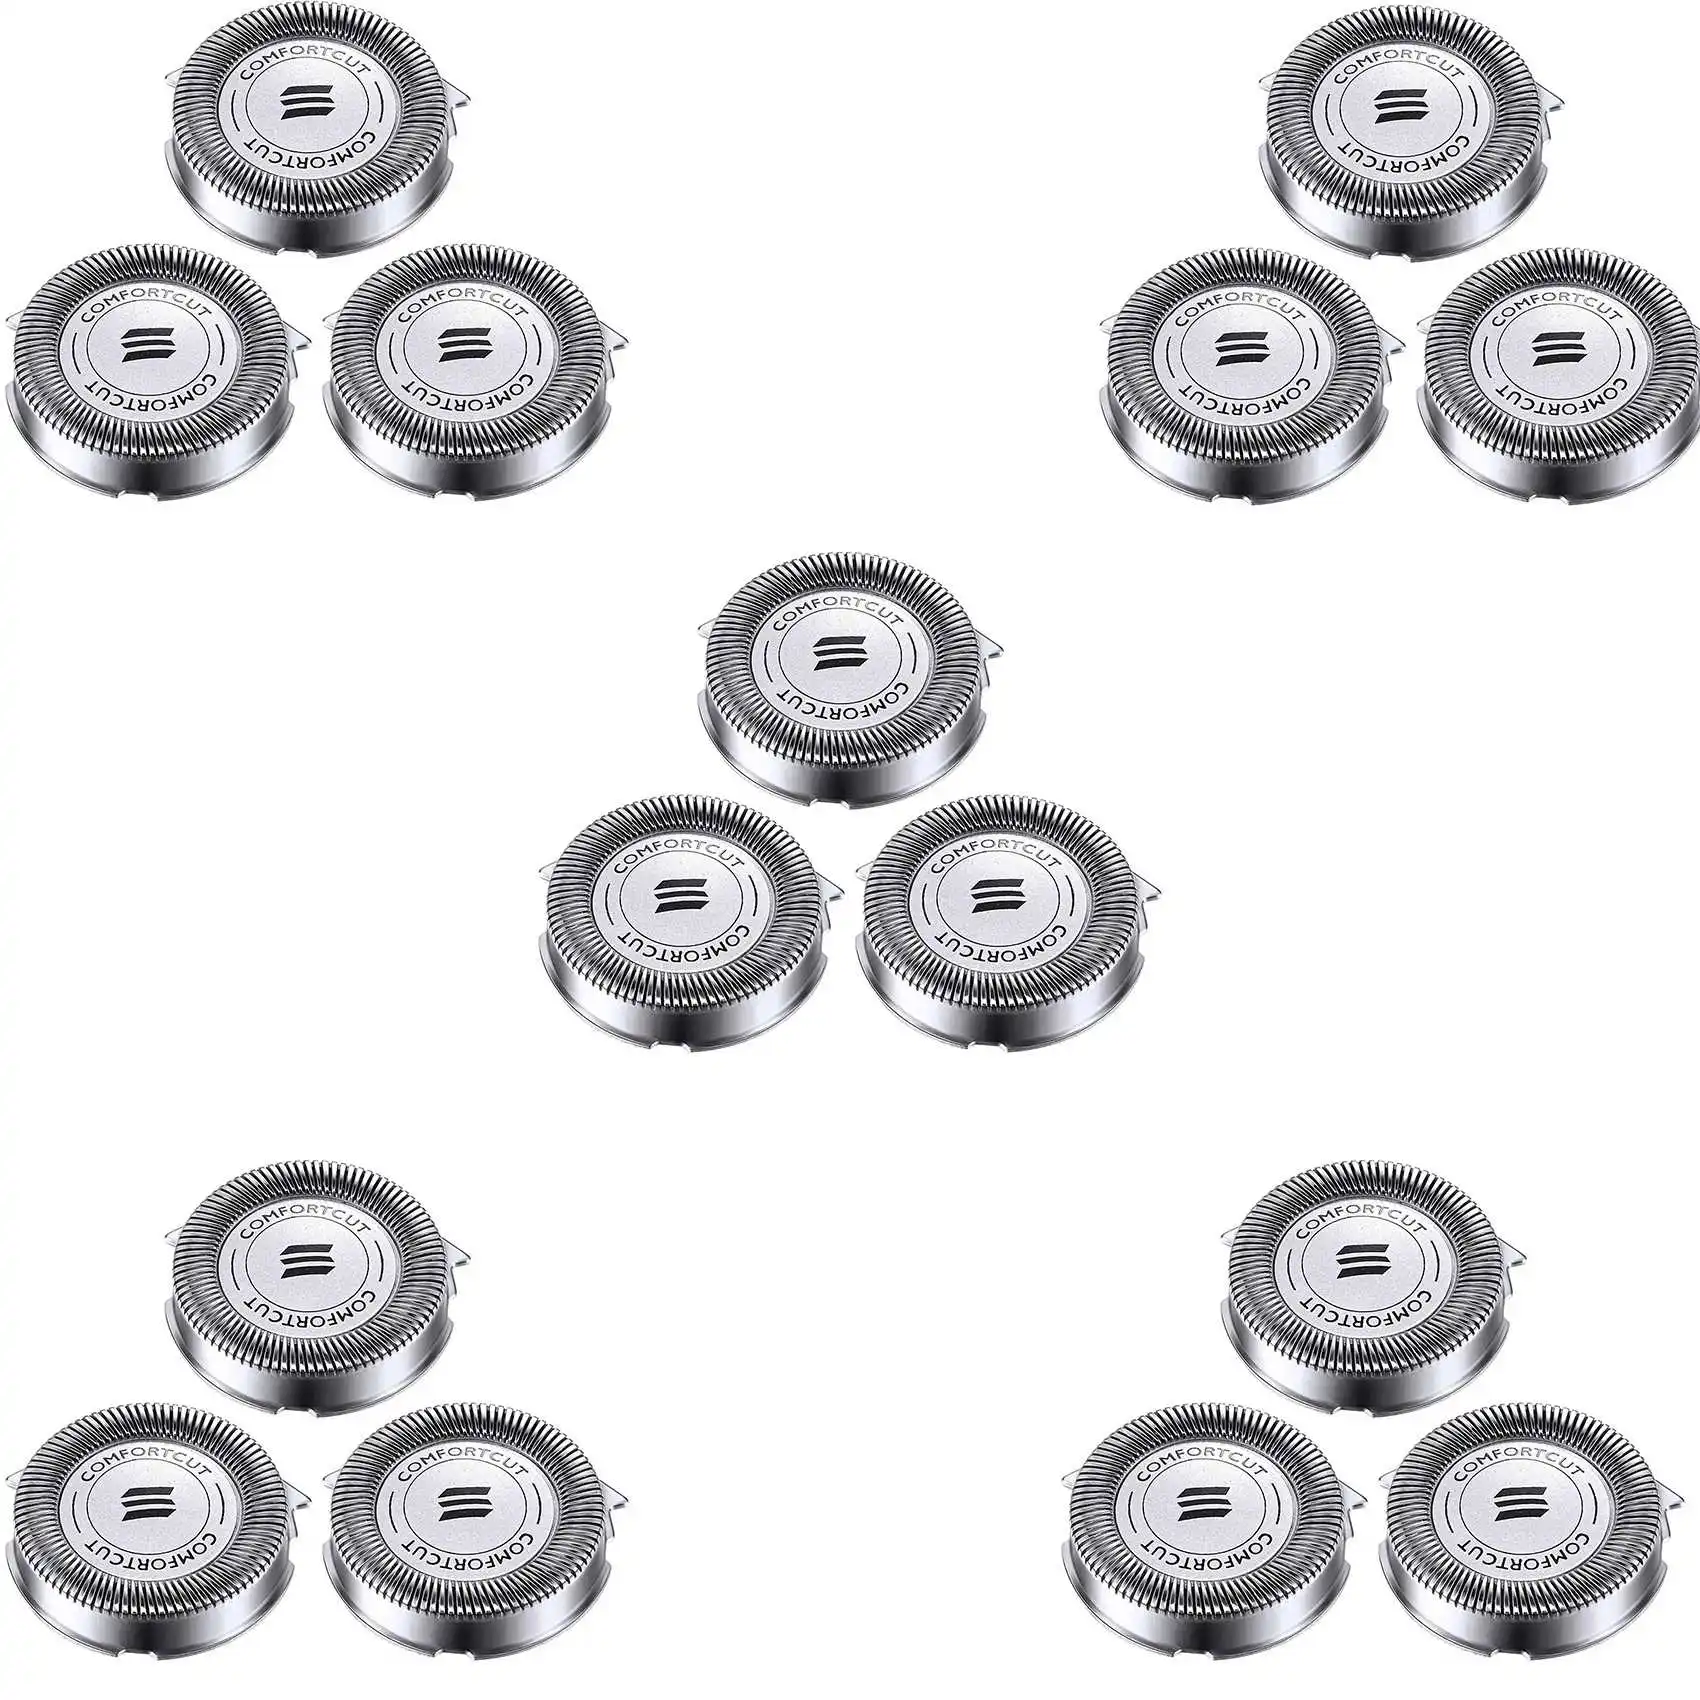 

15Pcs SH30/50/52 Shaver Replacement Heads for Philips Electric Shaver Series 1000, 2000, 3000, 5000 Blade Head